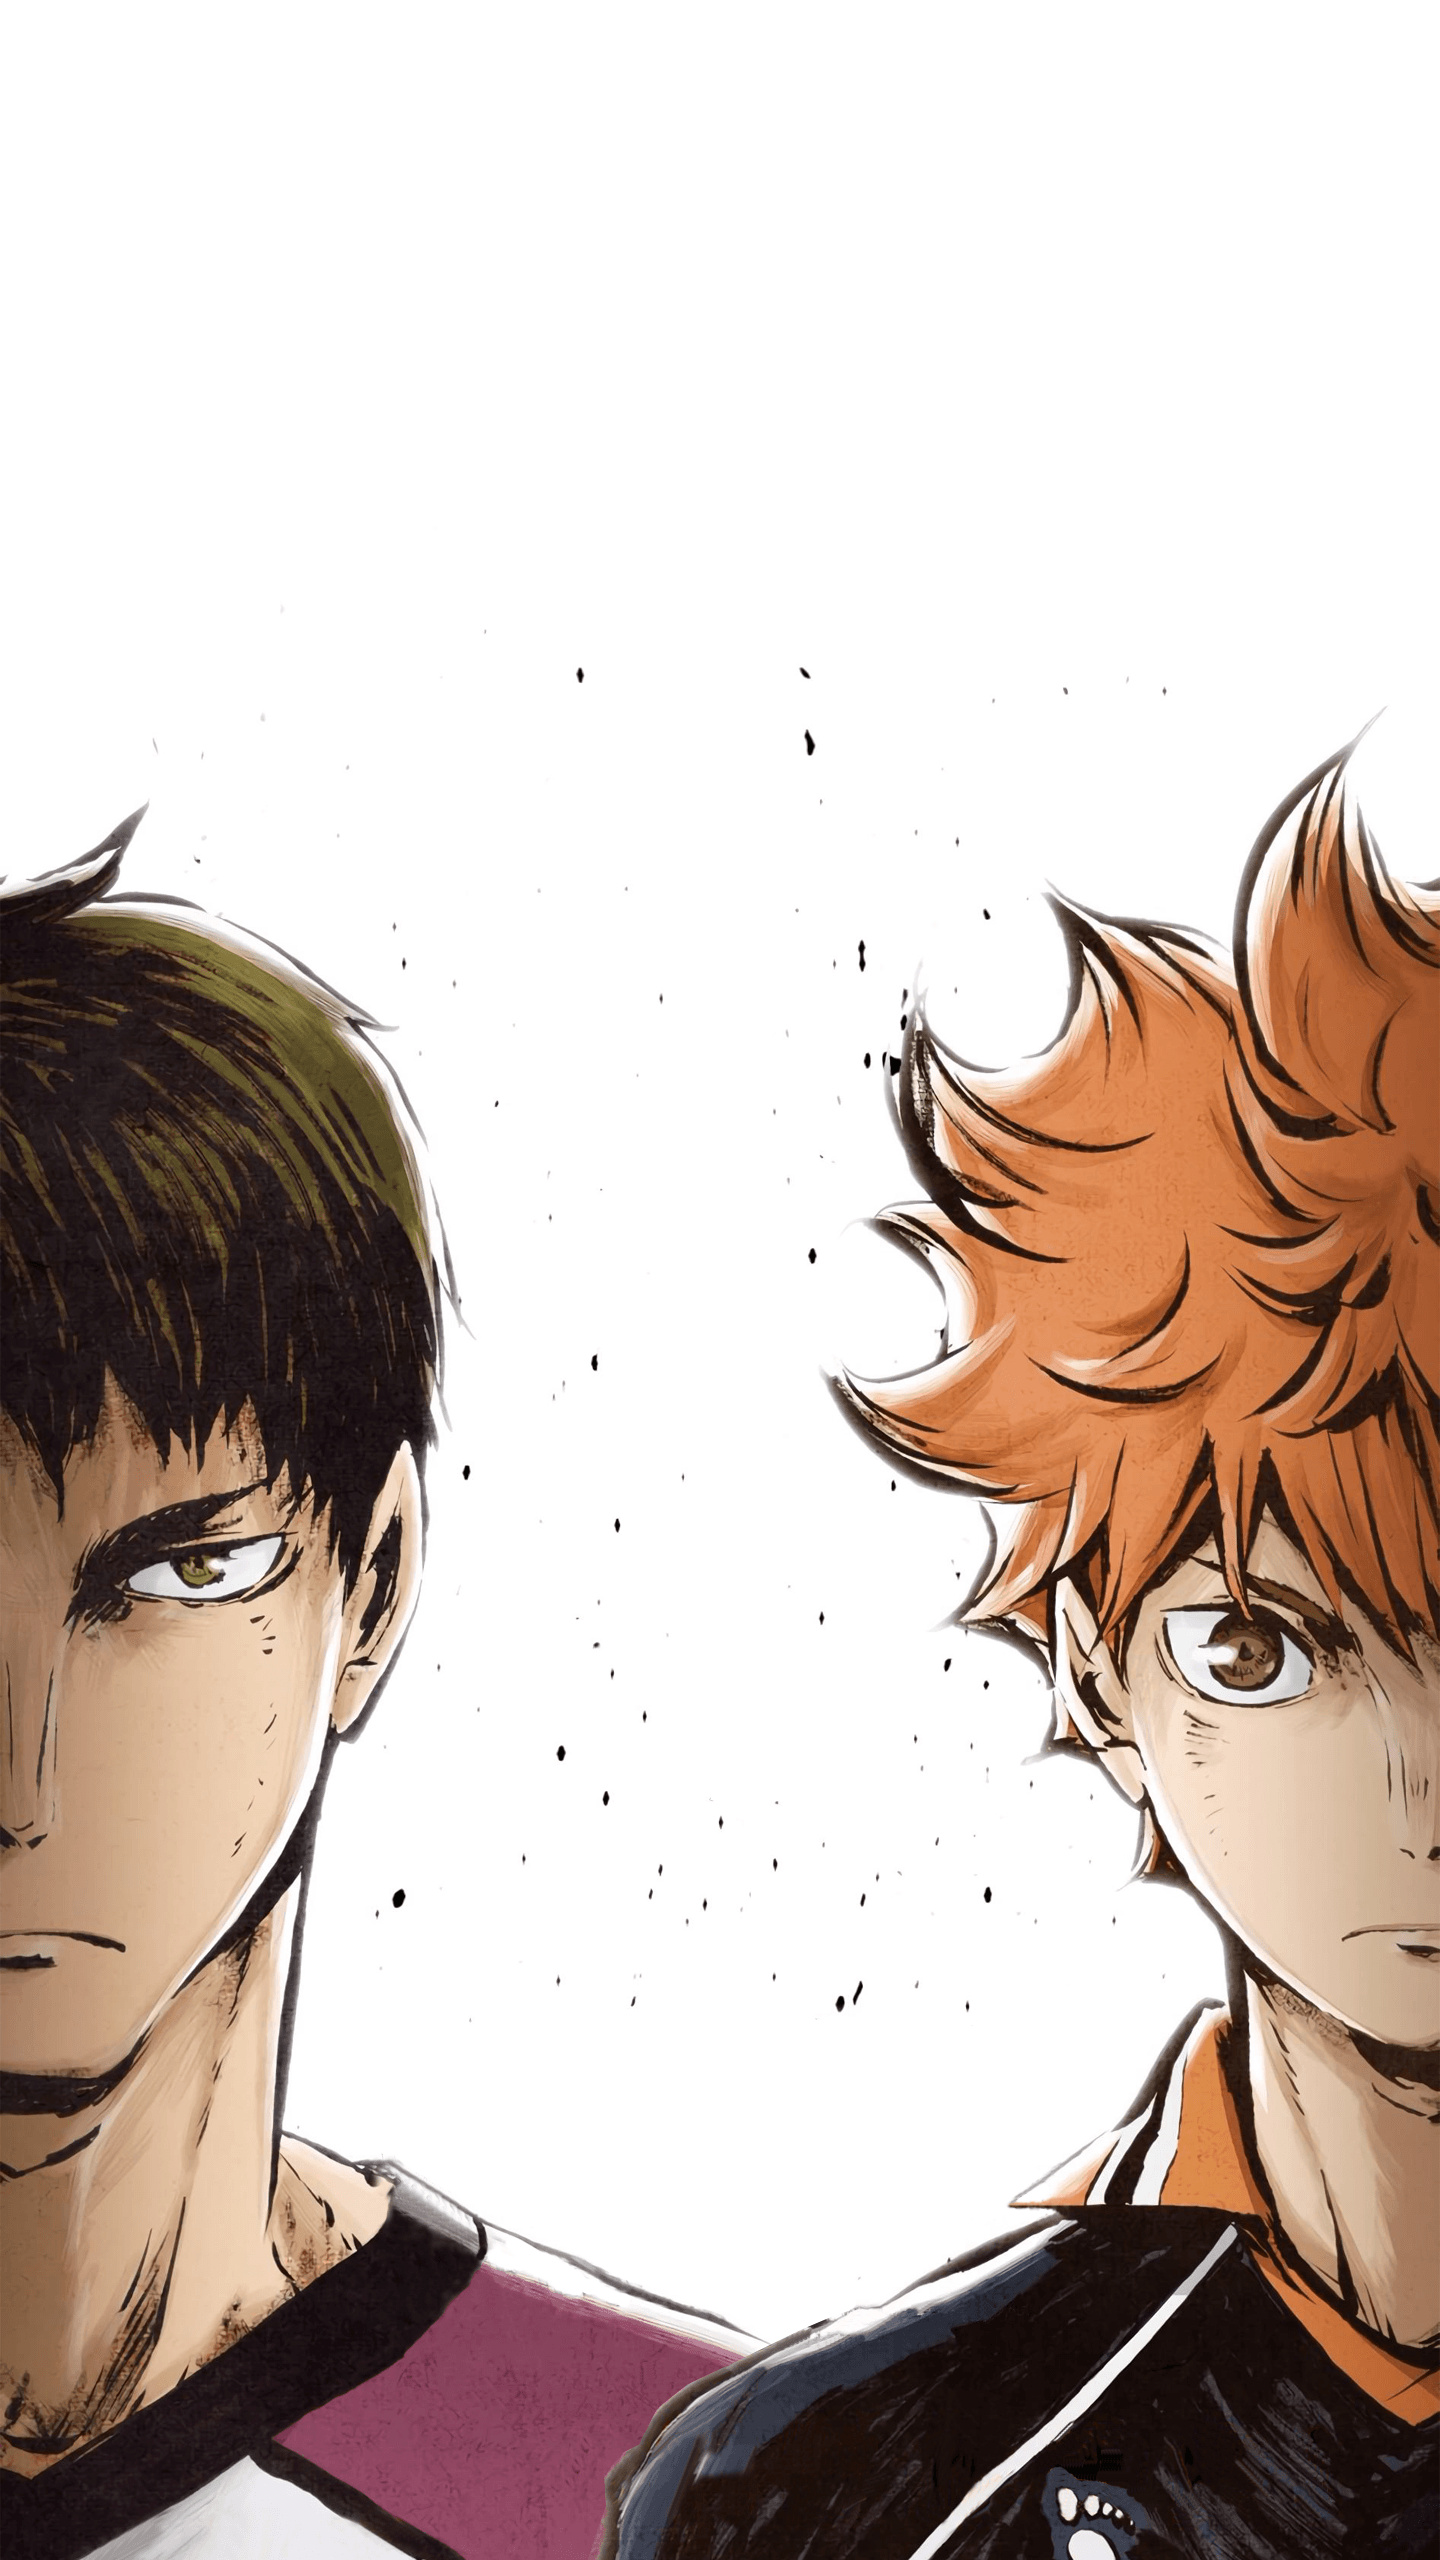 Haikyuu!!: One of the best-selling manga series, Over 55 million copies in circulation. 1440x2560 HD Background.